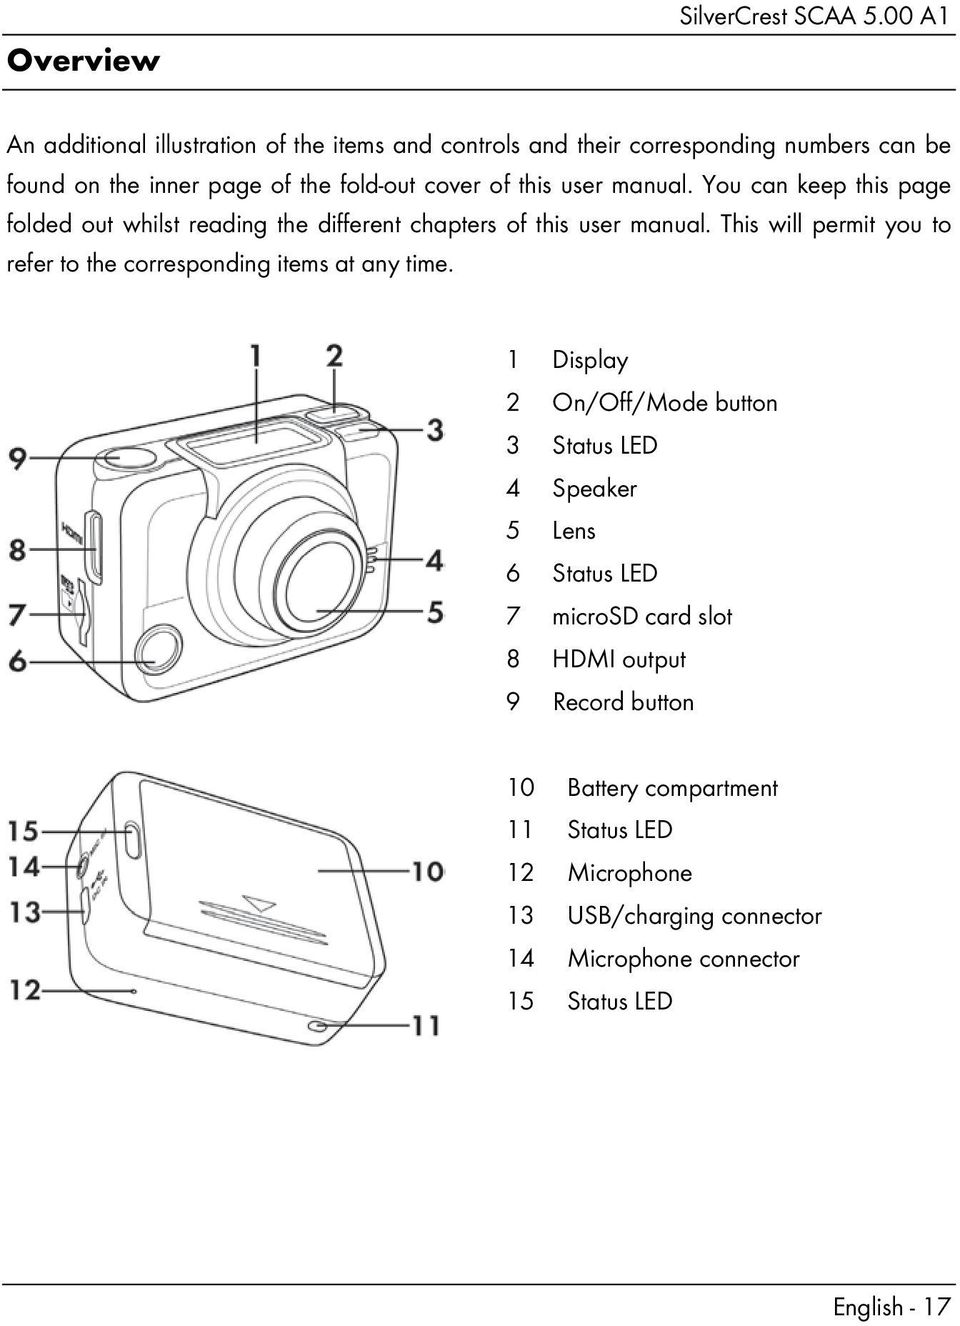 user manual. You can keep this page folded out whilst reading the different chapters of this user manual.